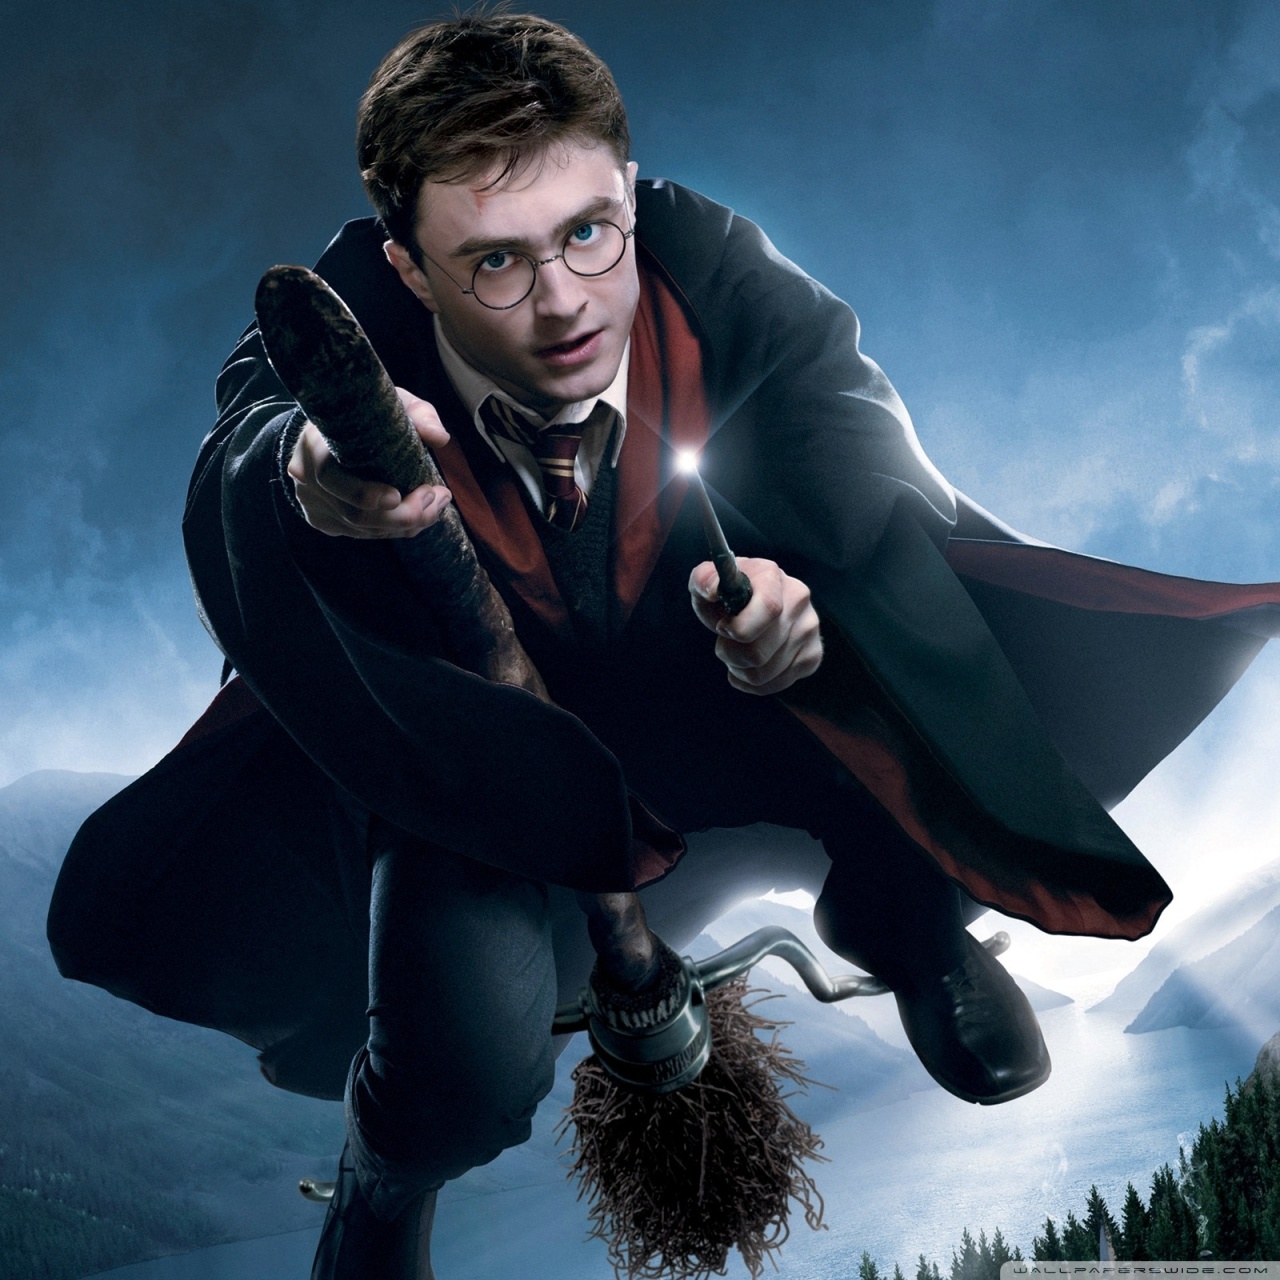 hd wallpapers of harry potter,fictional character,movie,digital compositing,photography,games